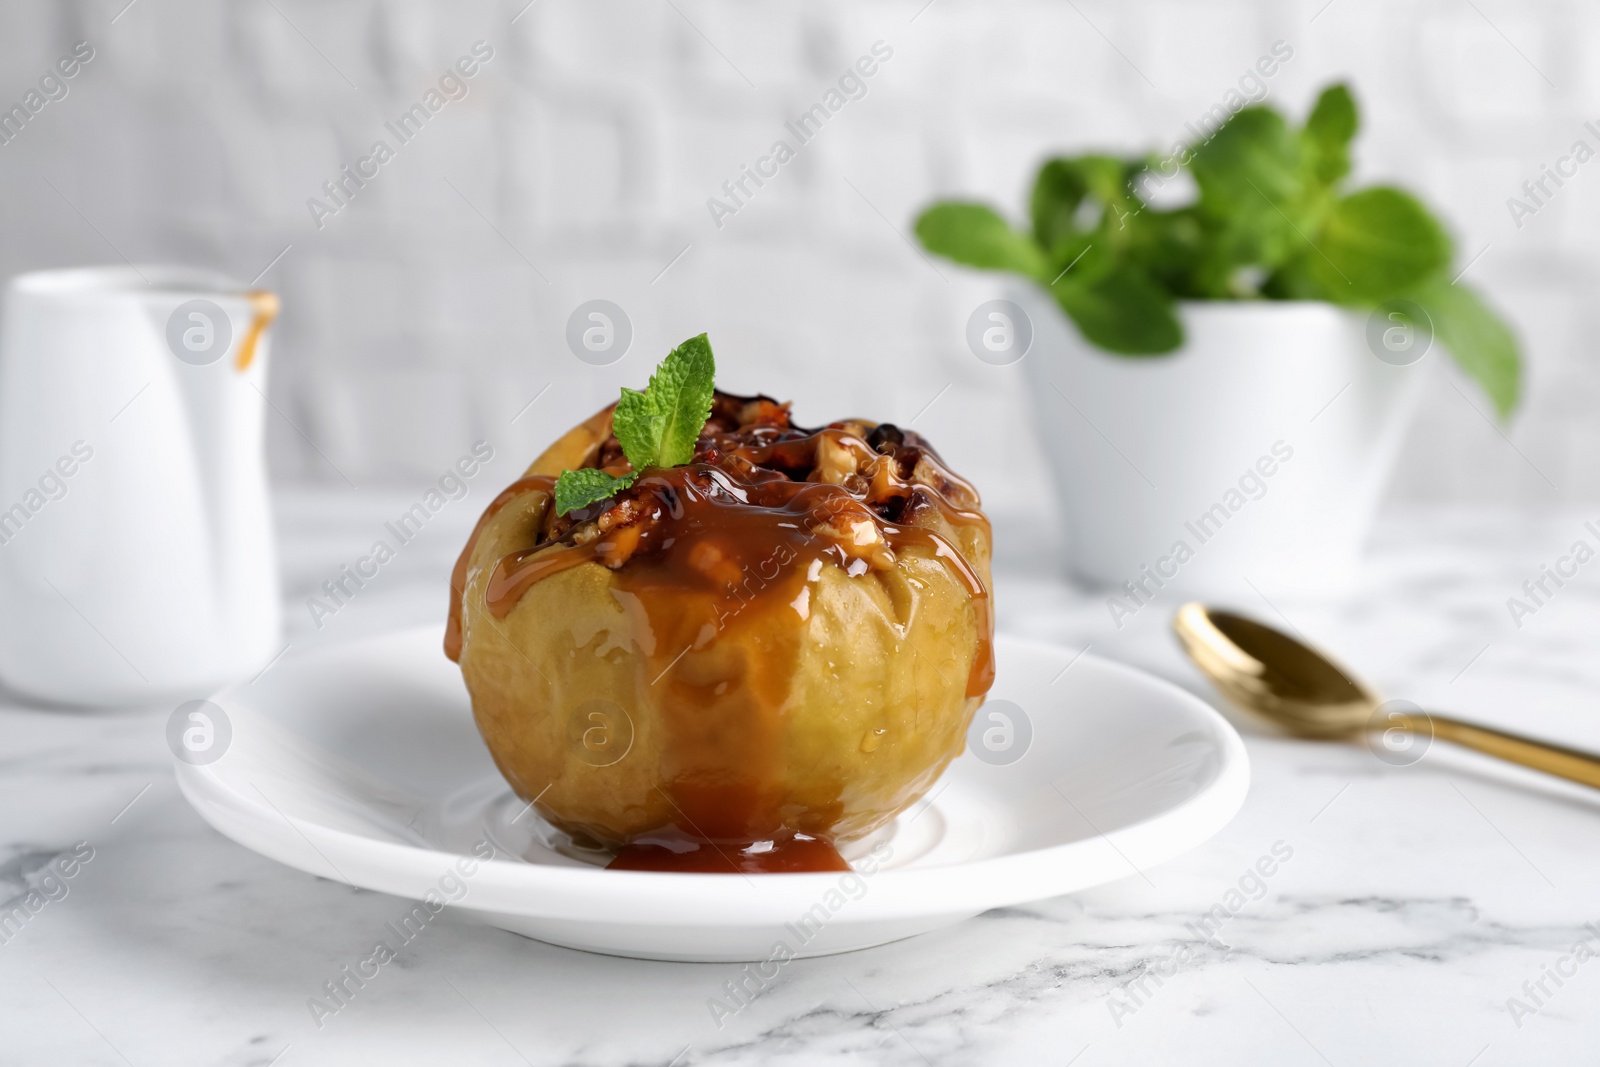 Photo of Delicious baked apple with nuts, caramel and mint served on white marble table